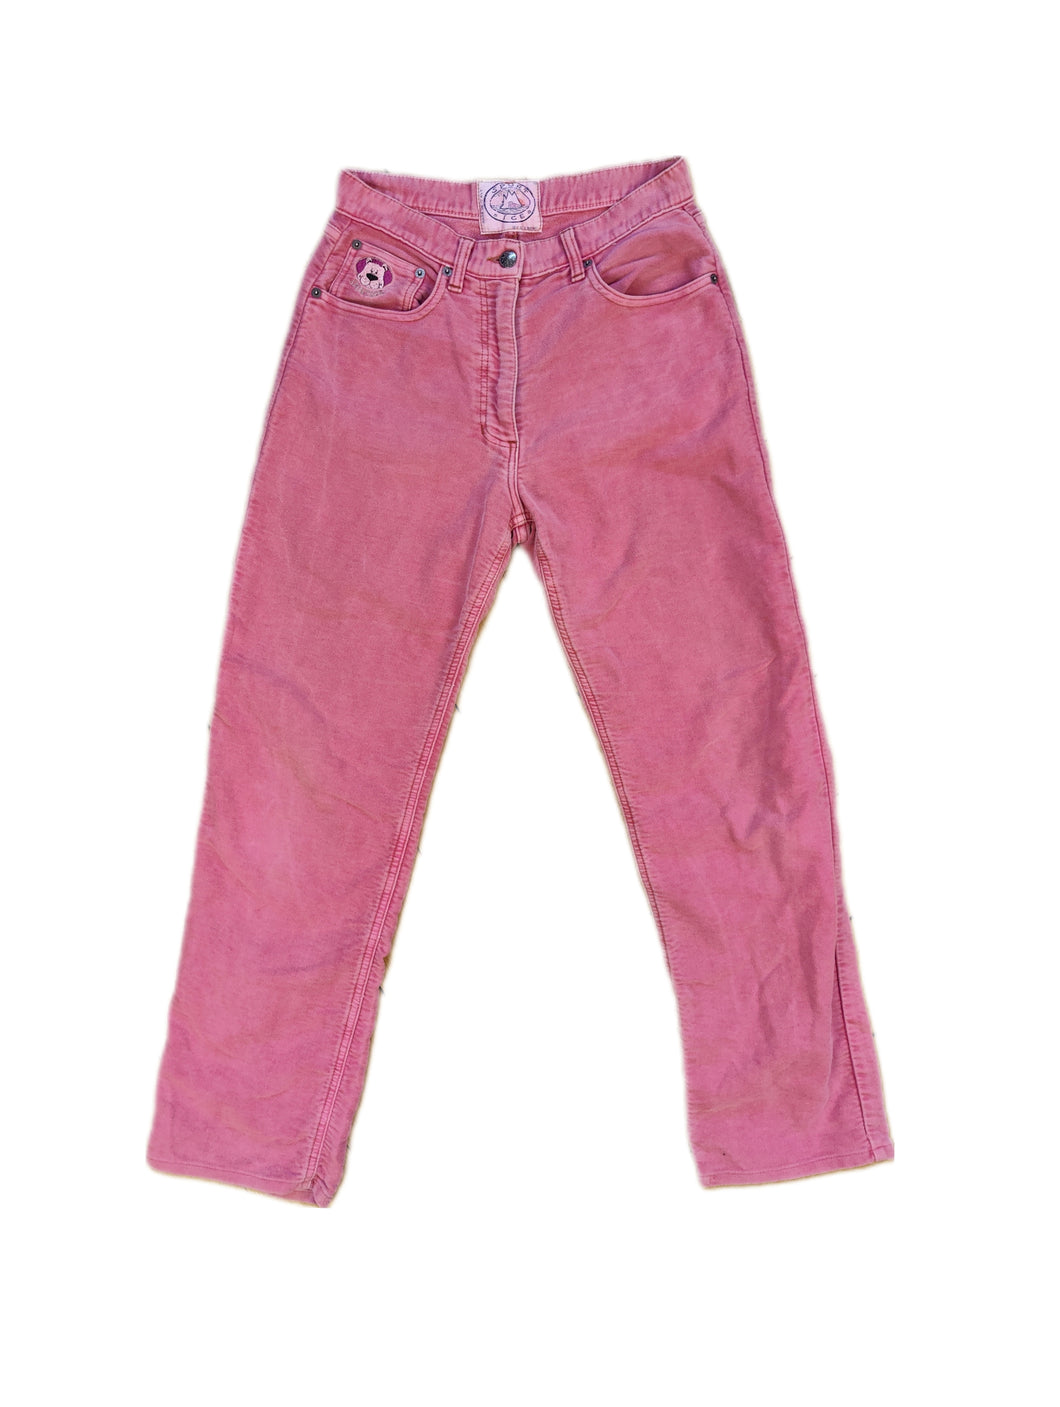 Vintage Sport Ice by Iceberg designer pants red pink dog embroidery trouser women IT42 EU S